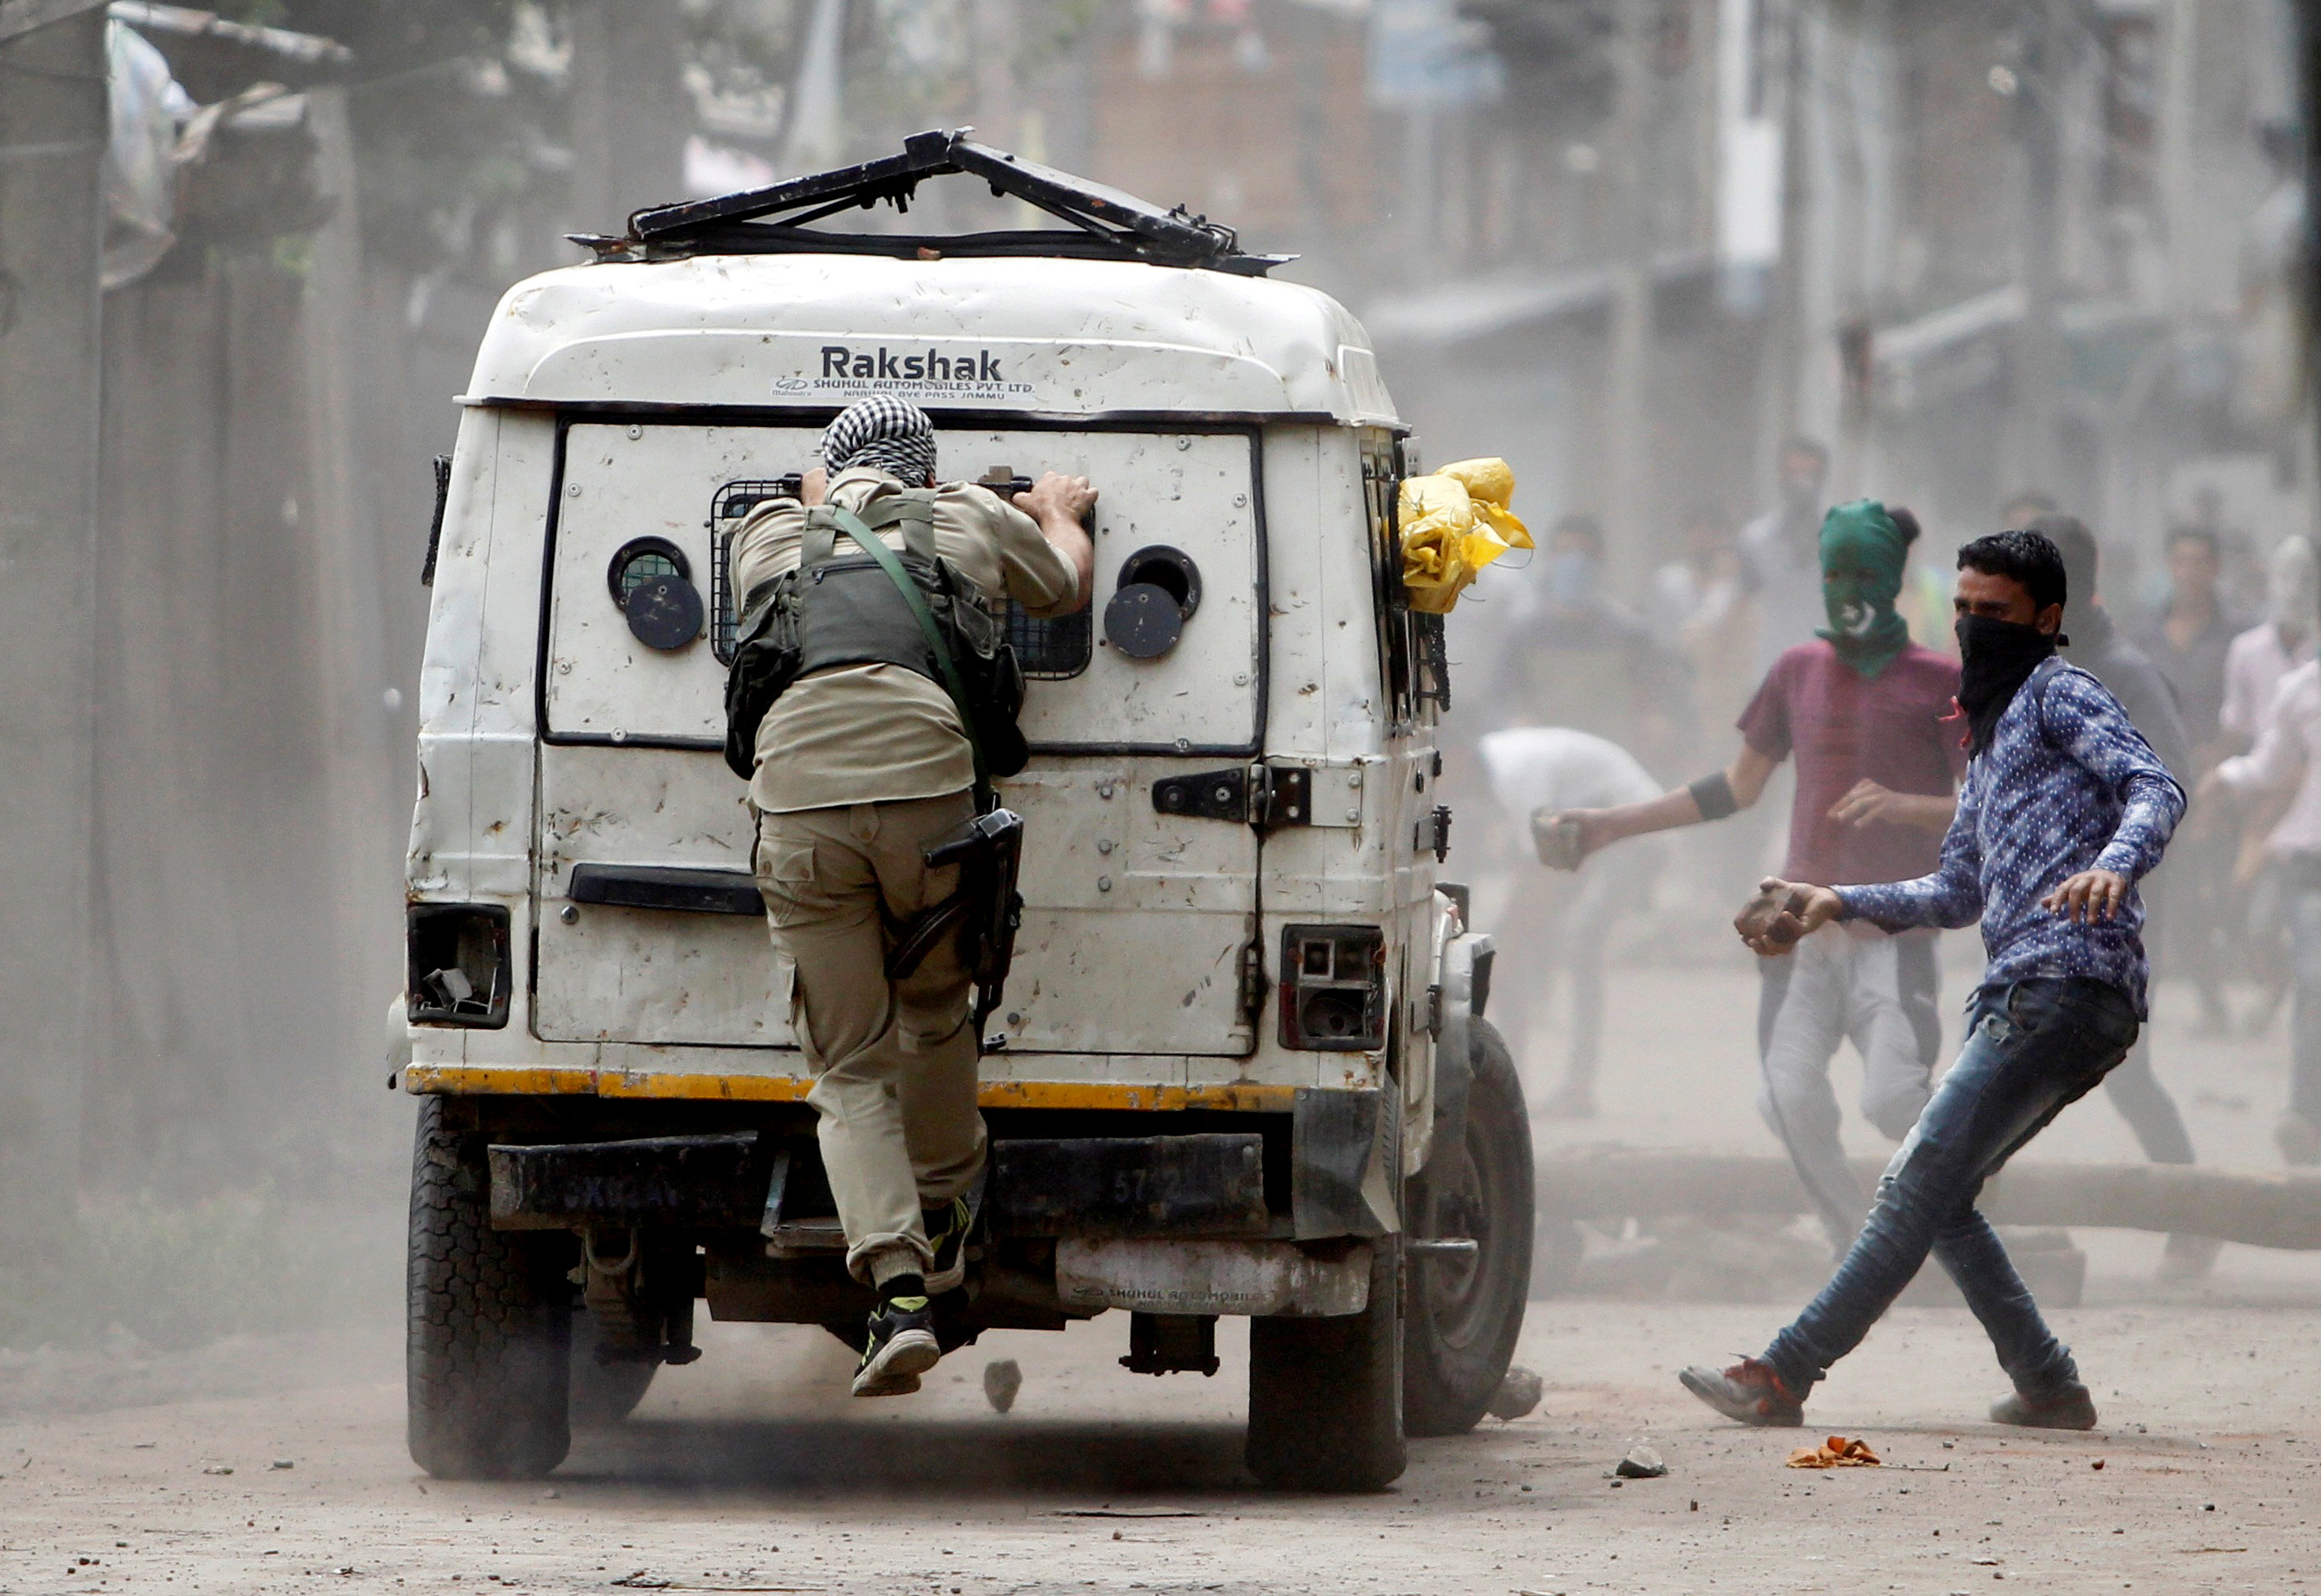 Demonstrators try to hurl stones at an Indian police vehicle during a protest in Srinagar against the recent killings in Kashmir, August 30, 2016. To match Insight INDIA-KASHMIR/ REUTERS/Danish Ismail/File Photo